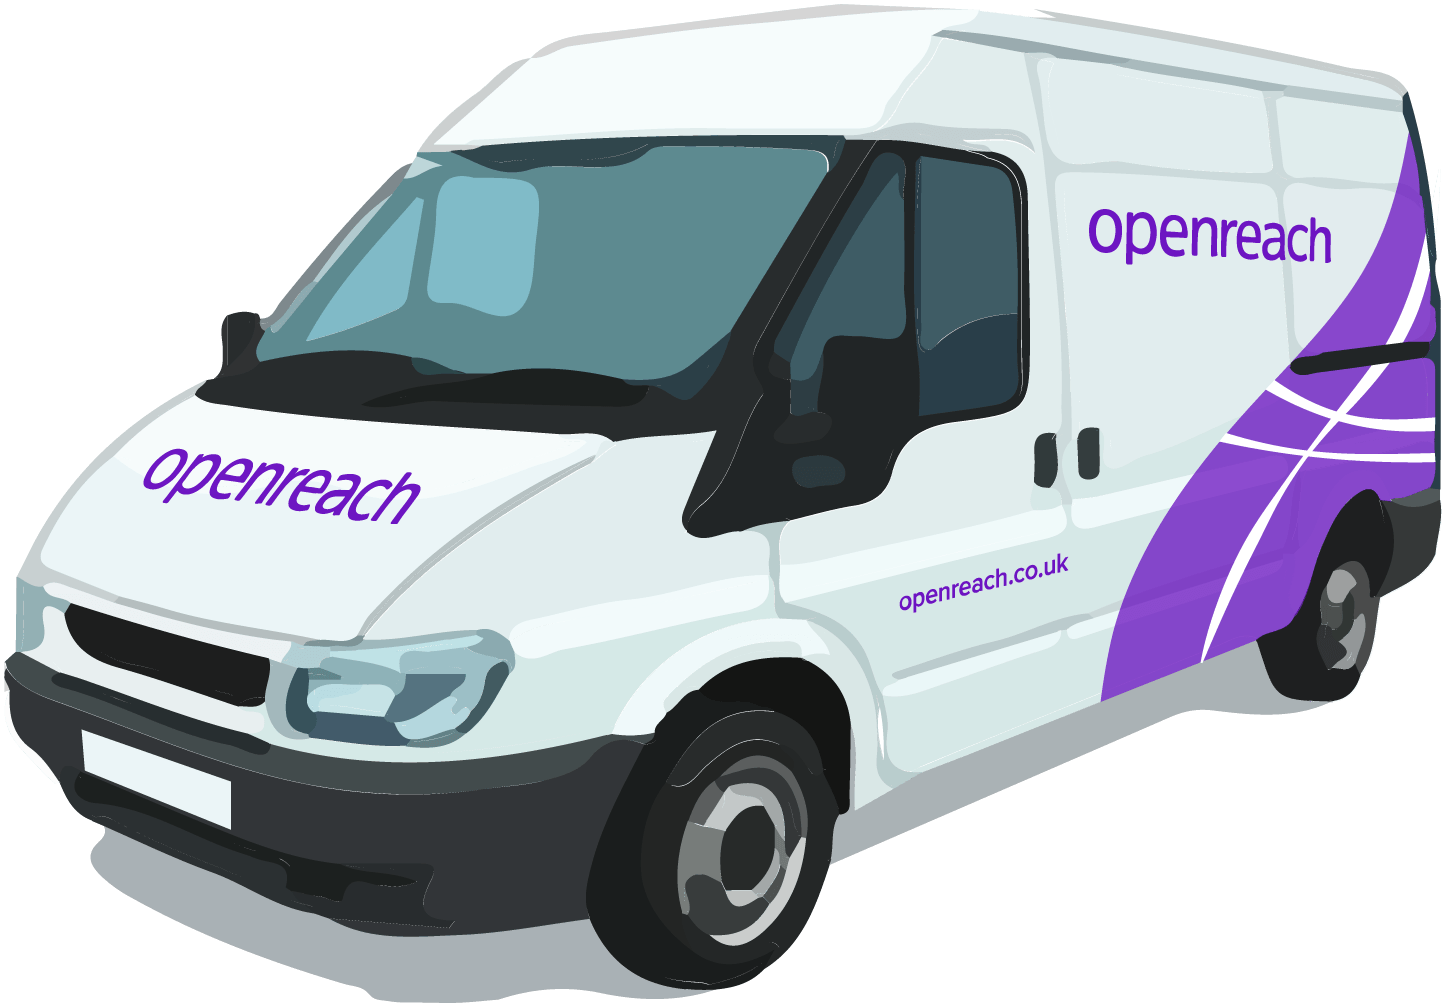 managed by openreach